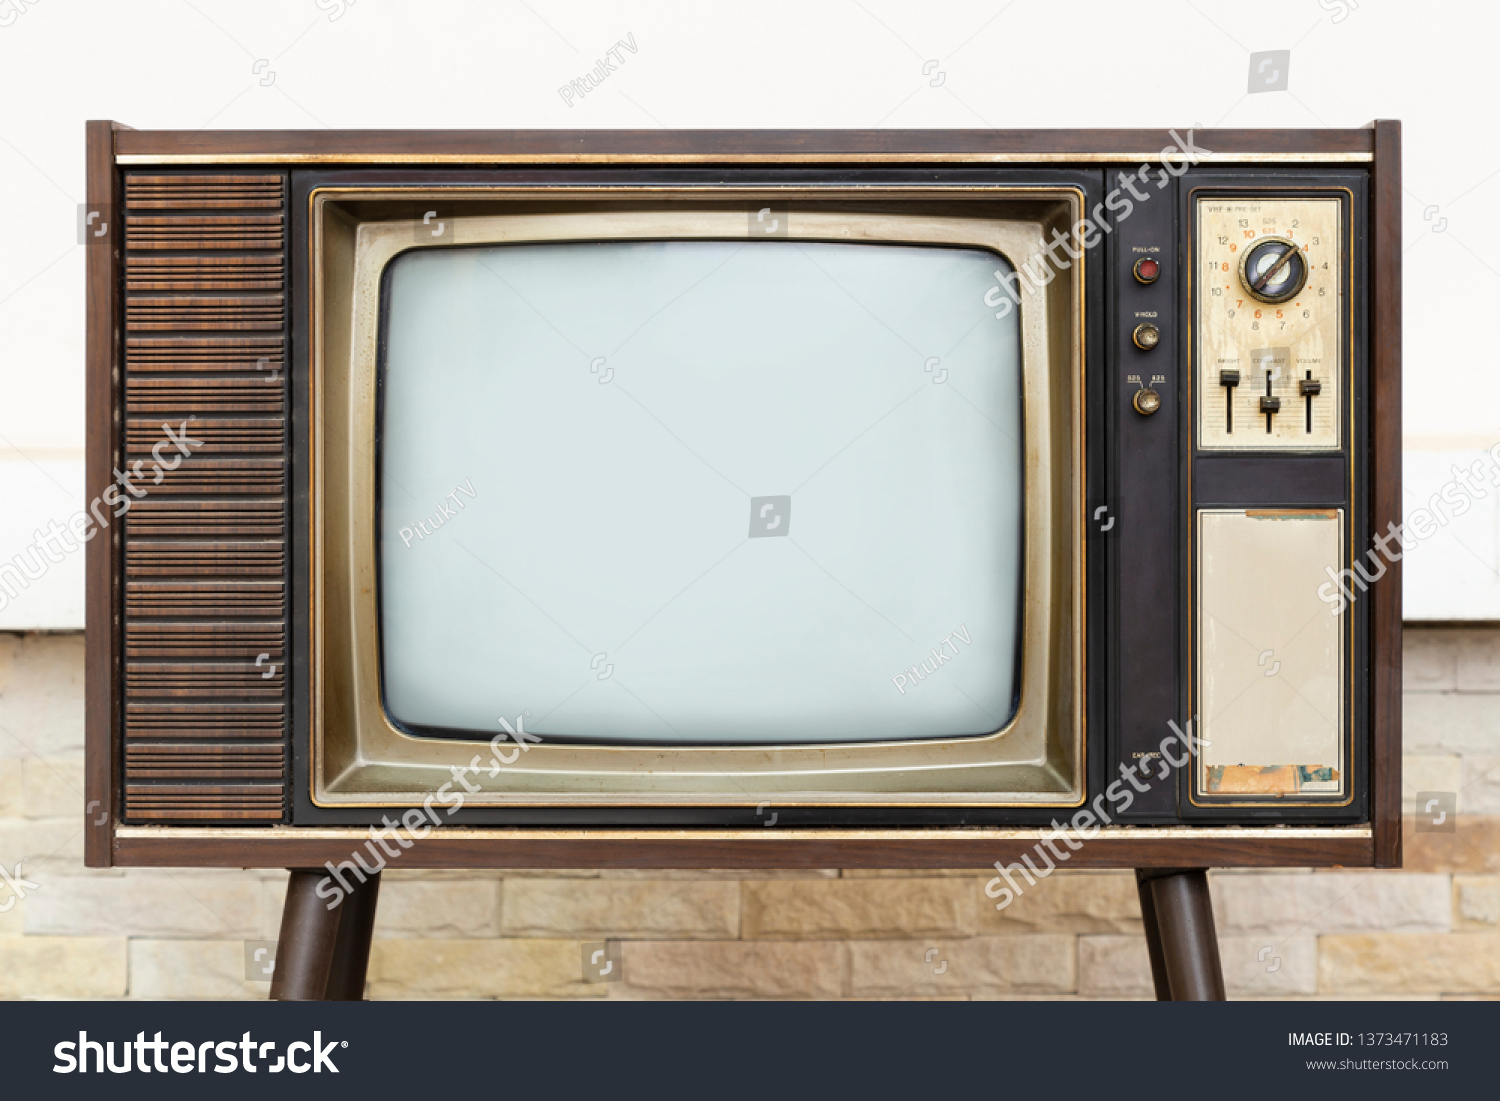 Retro, old television stands with brick wall background #1373471183